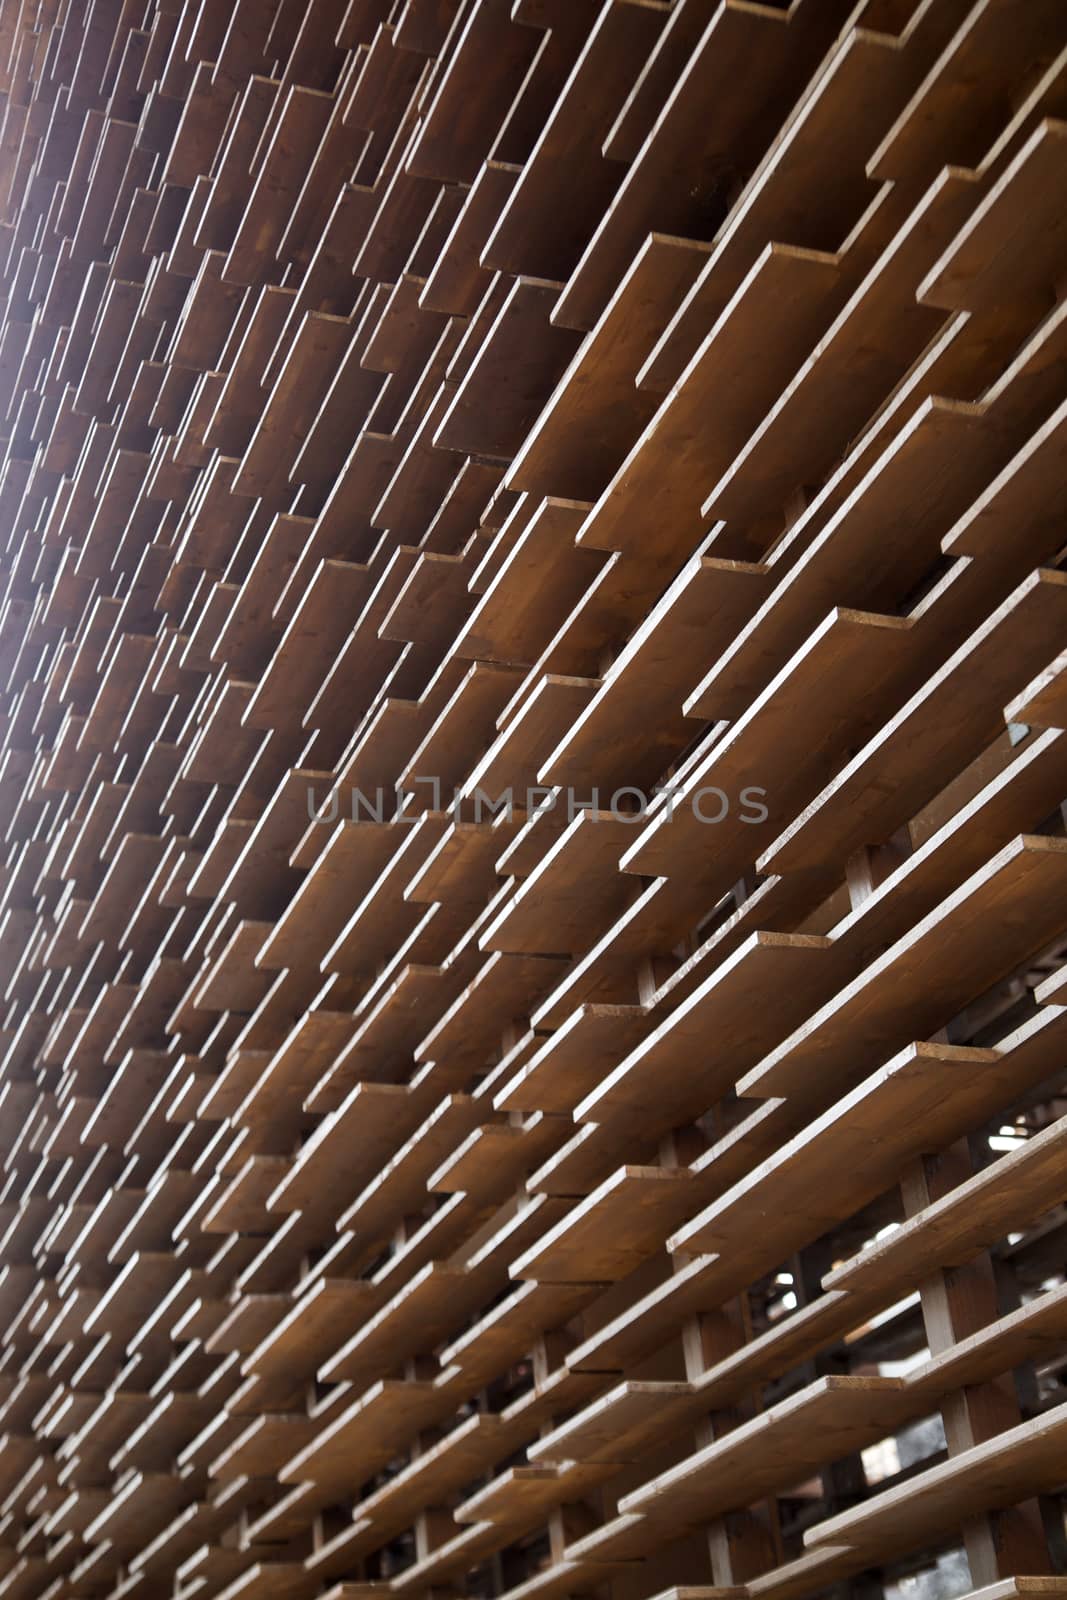 Perimeter wall of building built in wooden boards